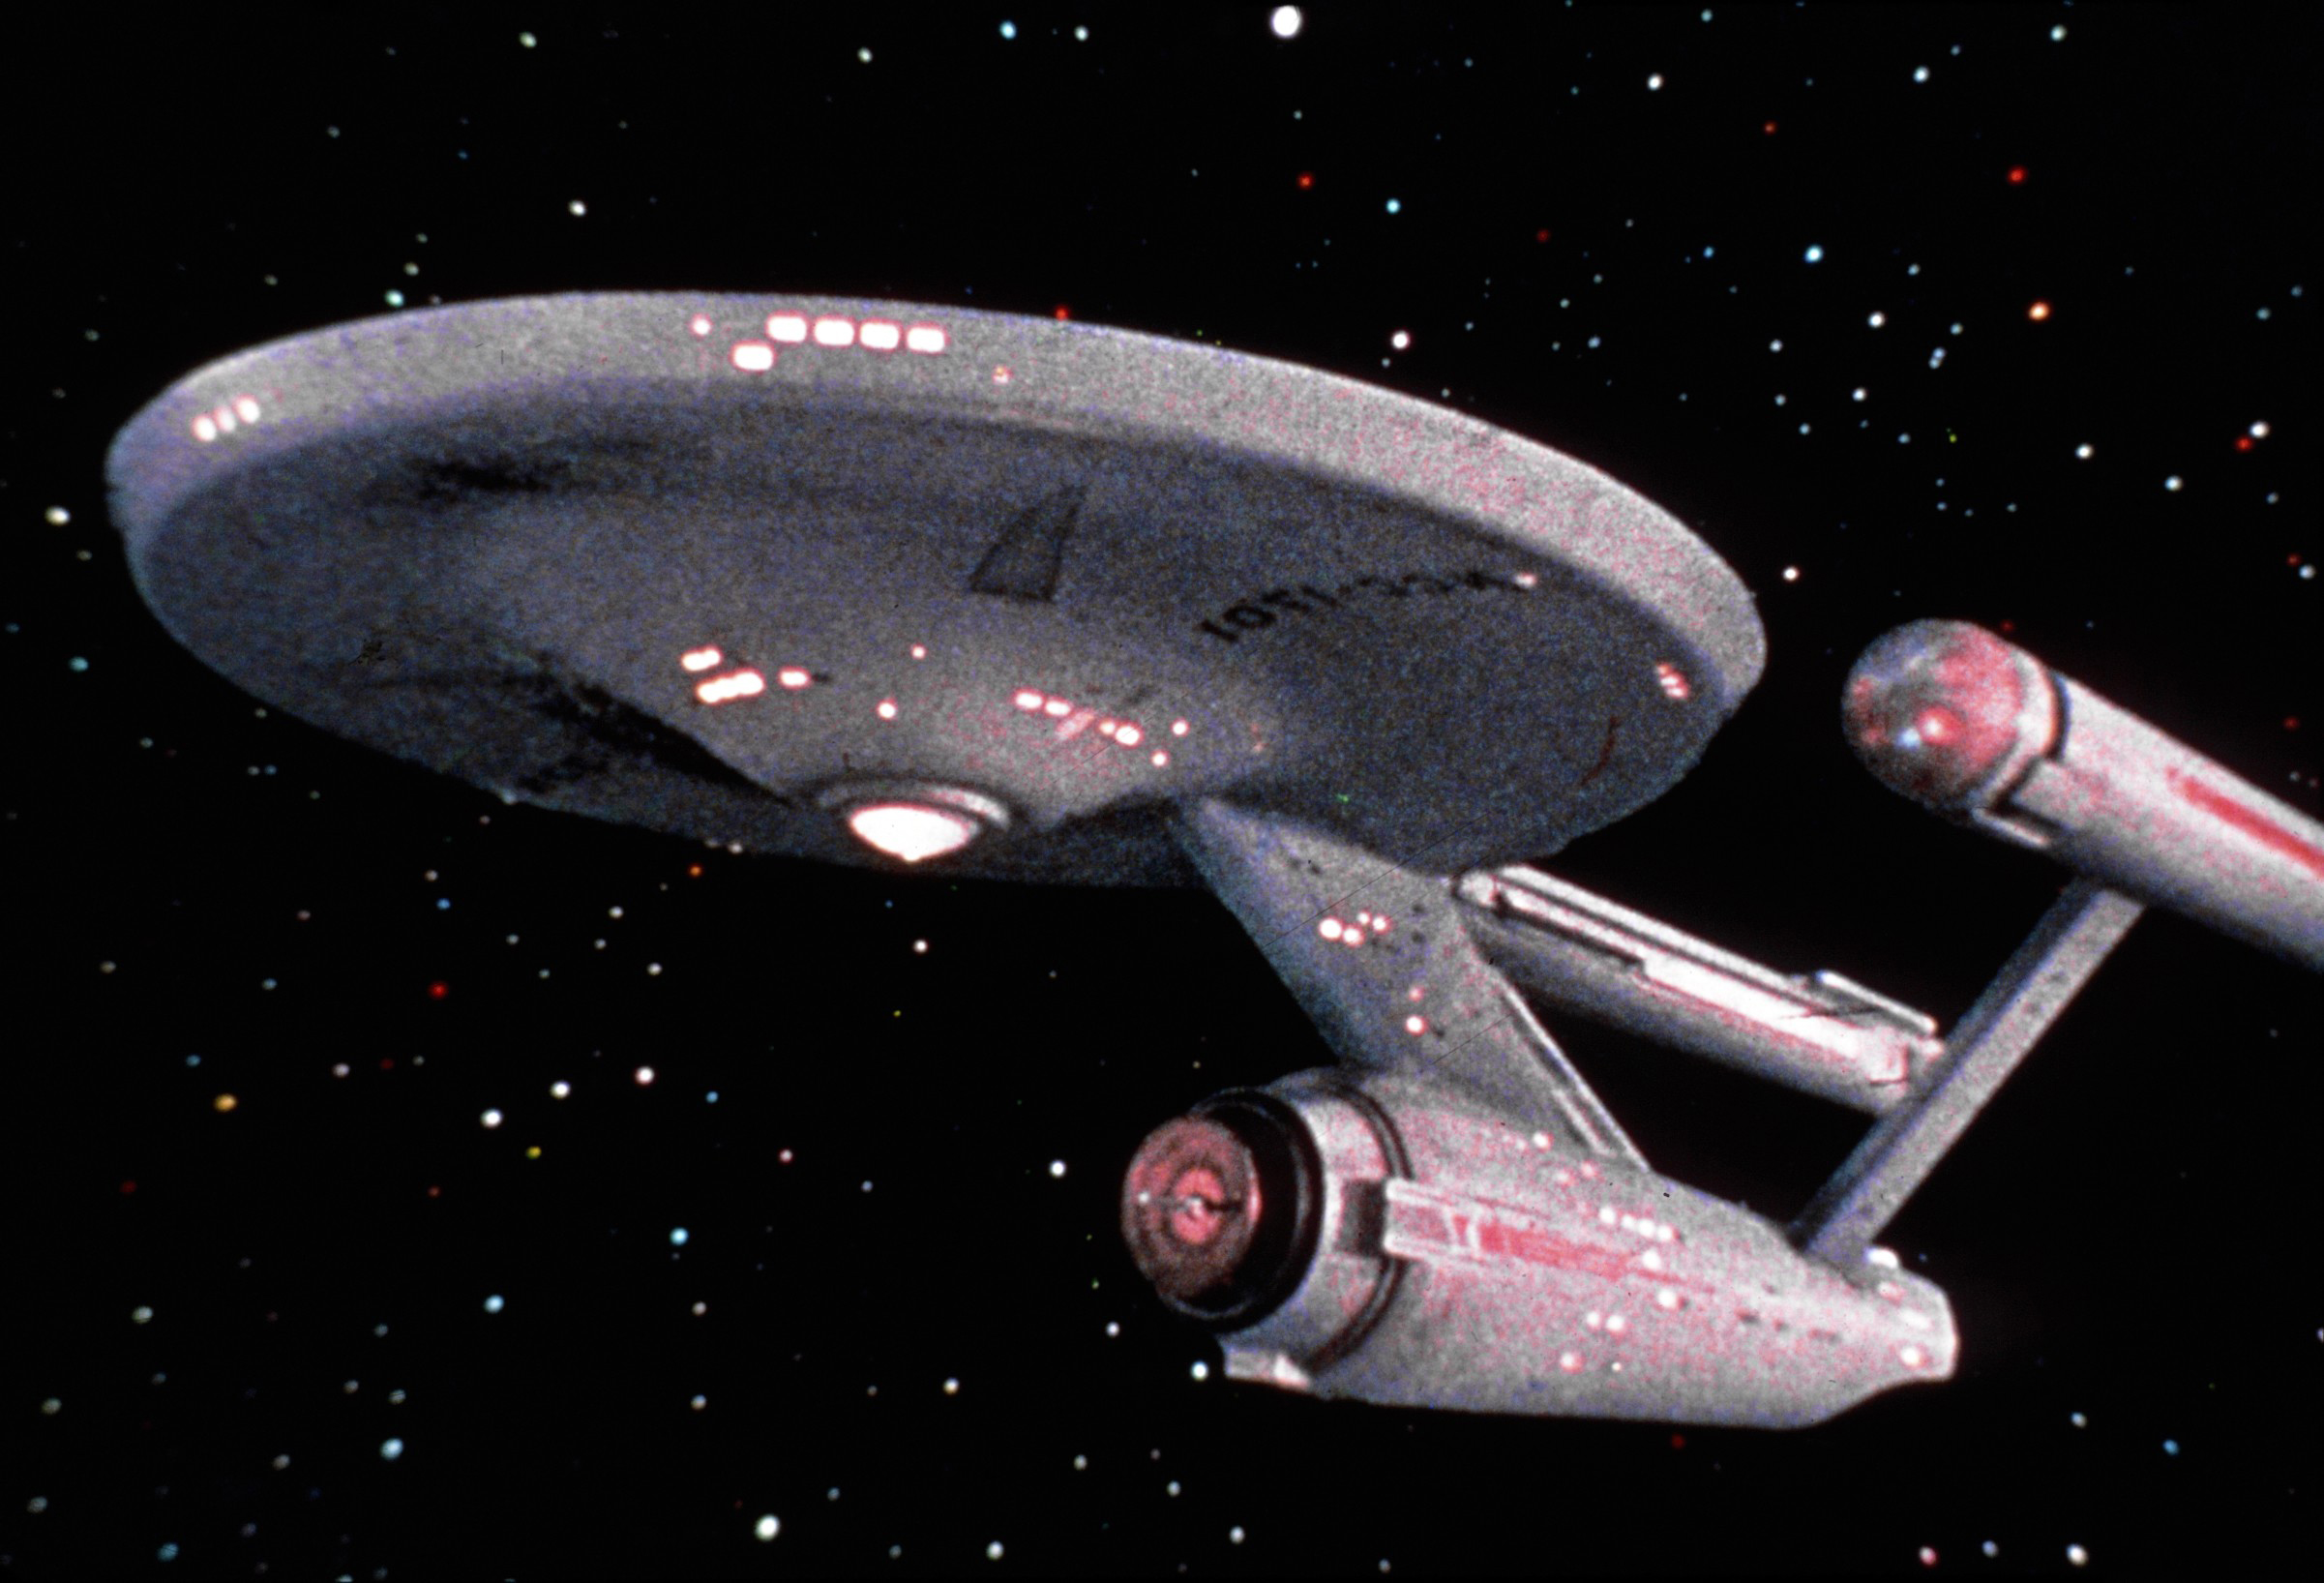 shot of the USS "Enterprise" starship as seen in the original 1966-69 series "Star Trek." The ship is set against the black backdrop of space, dotted with stars.